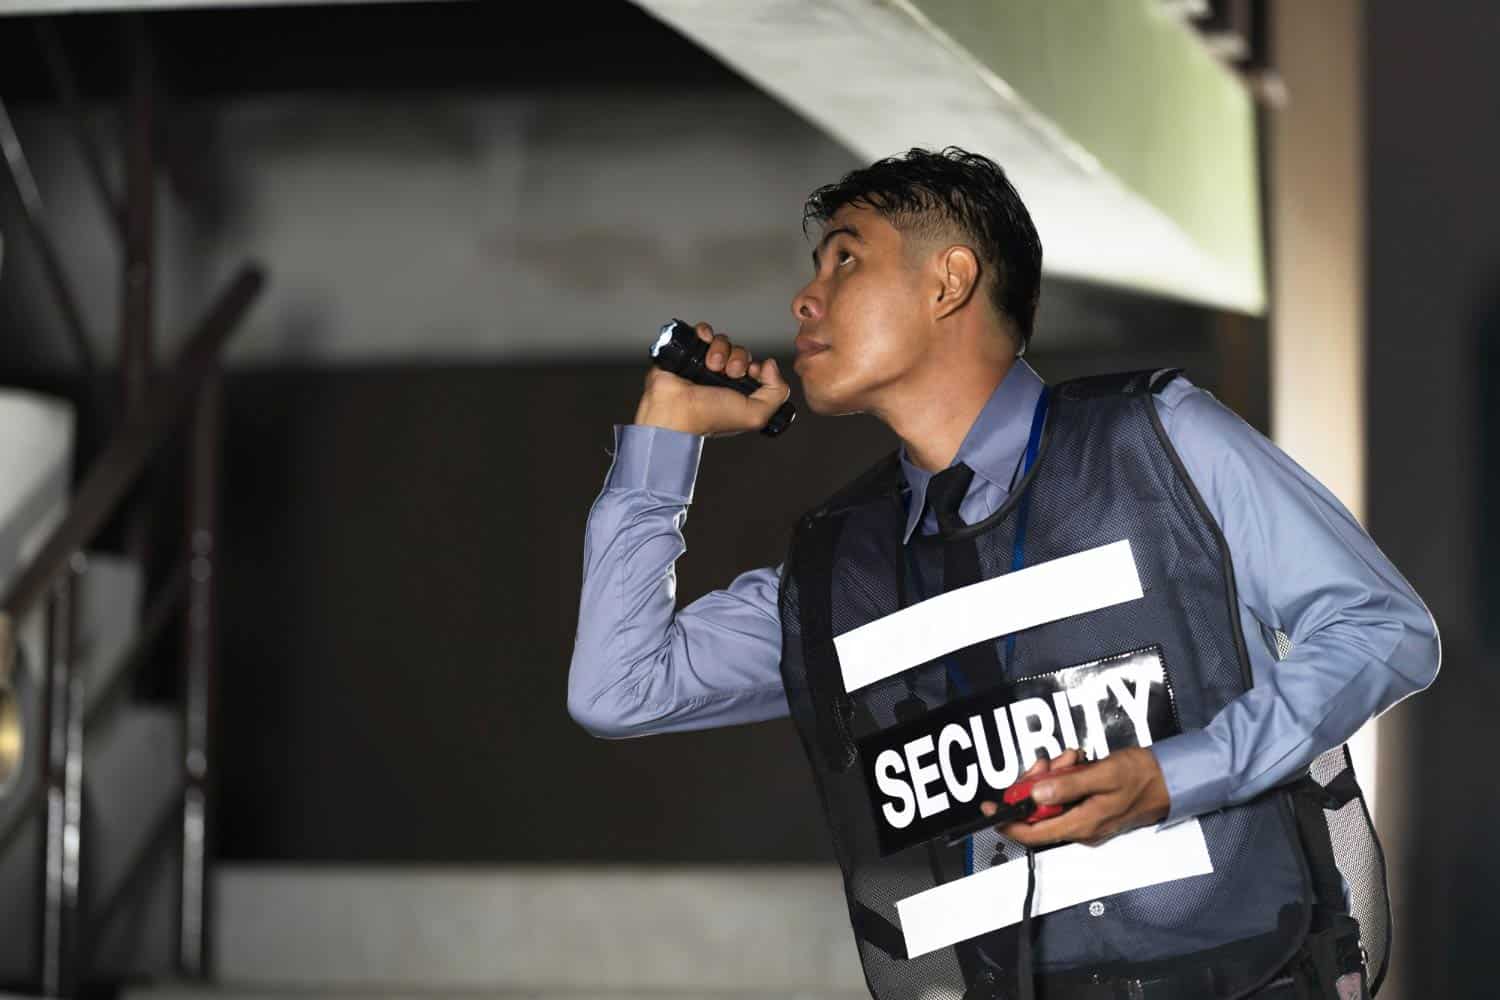 Risks of Live Security Guards